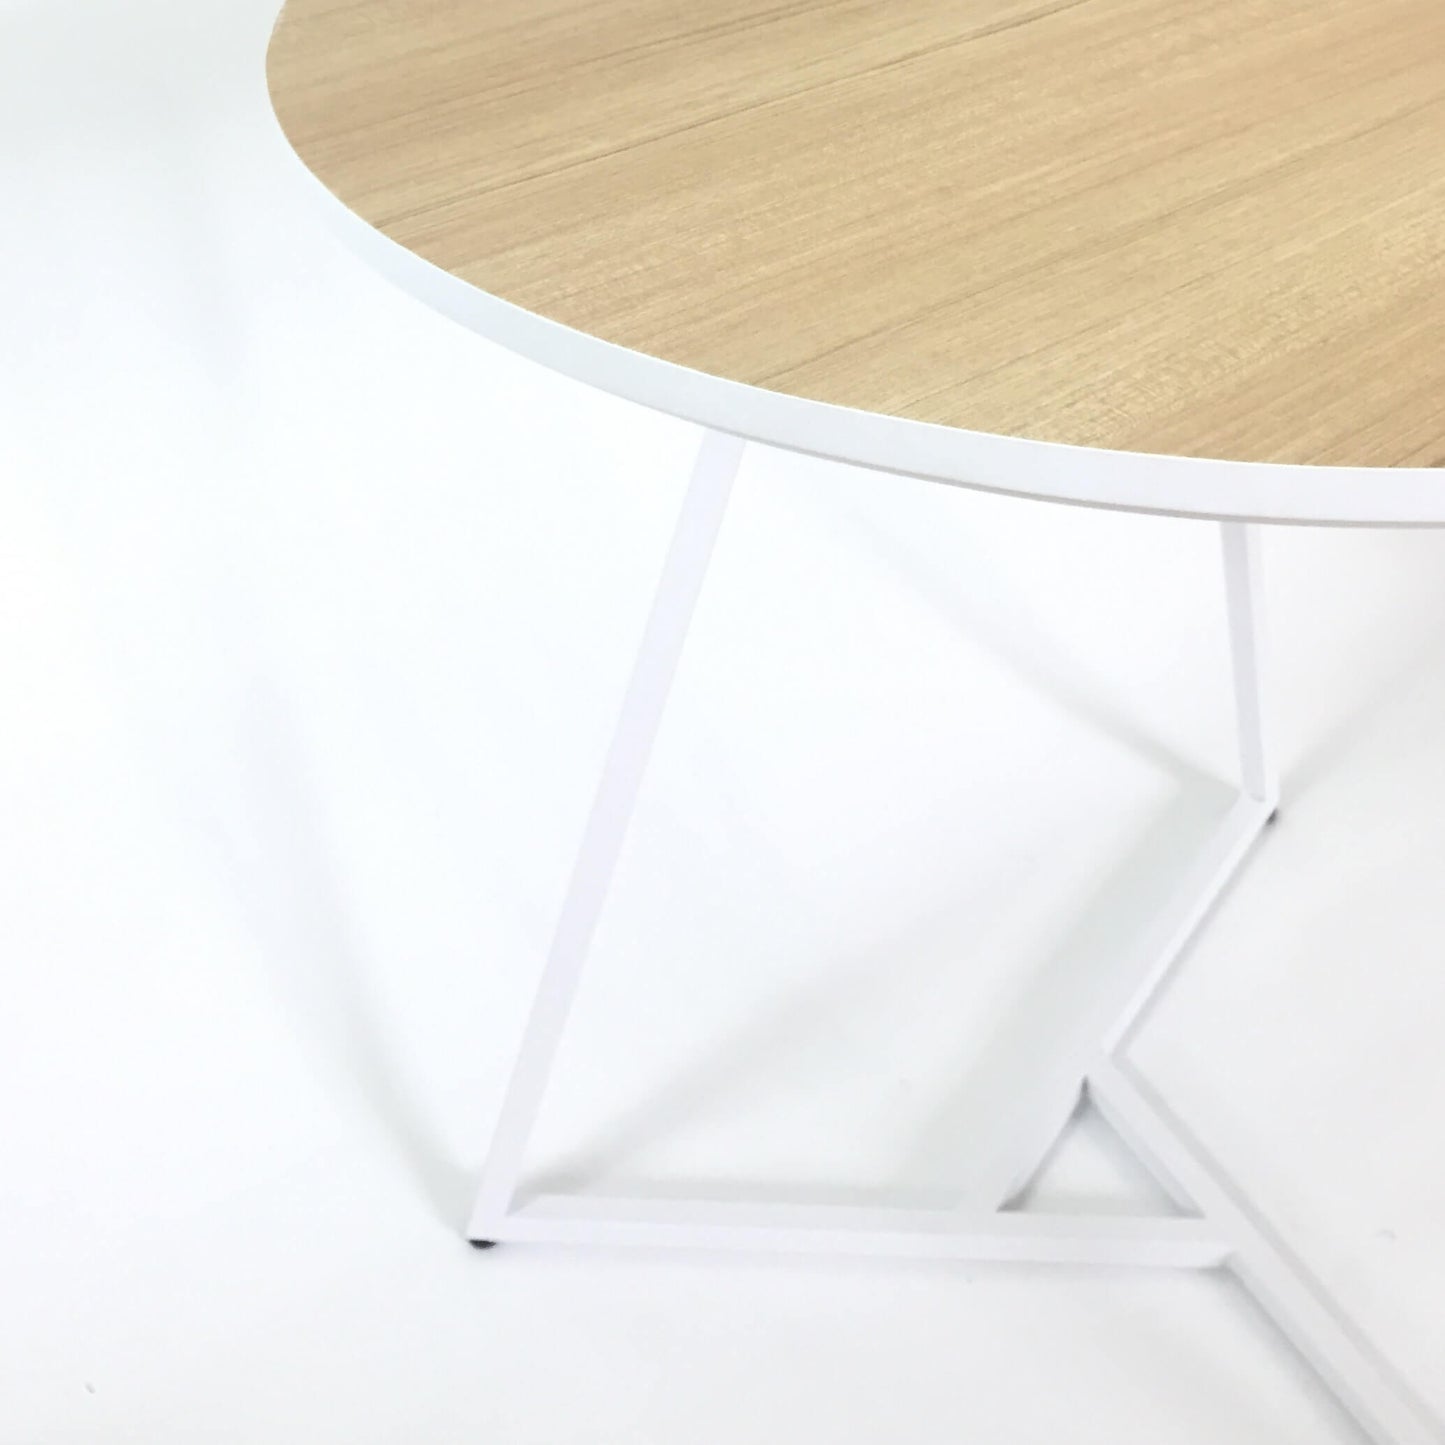 Bamm Small Round Dining Bistro Table